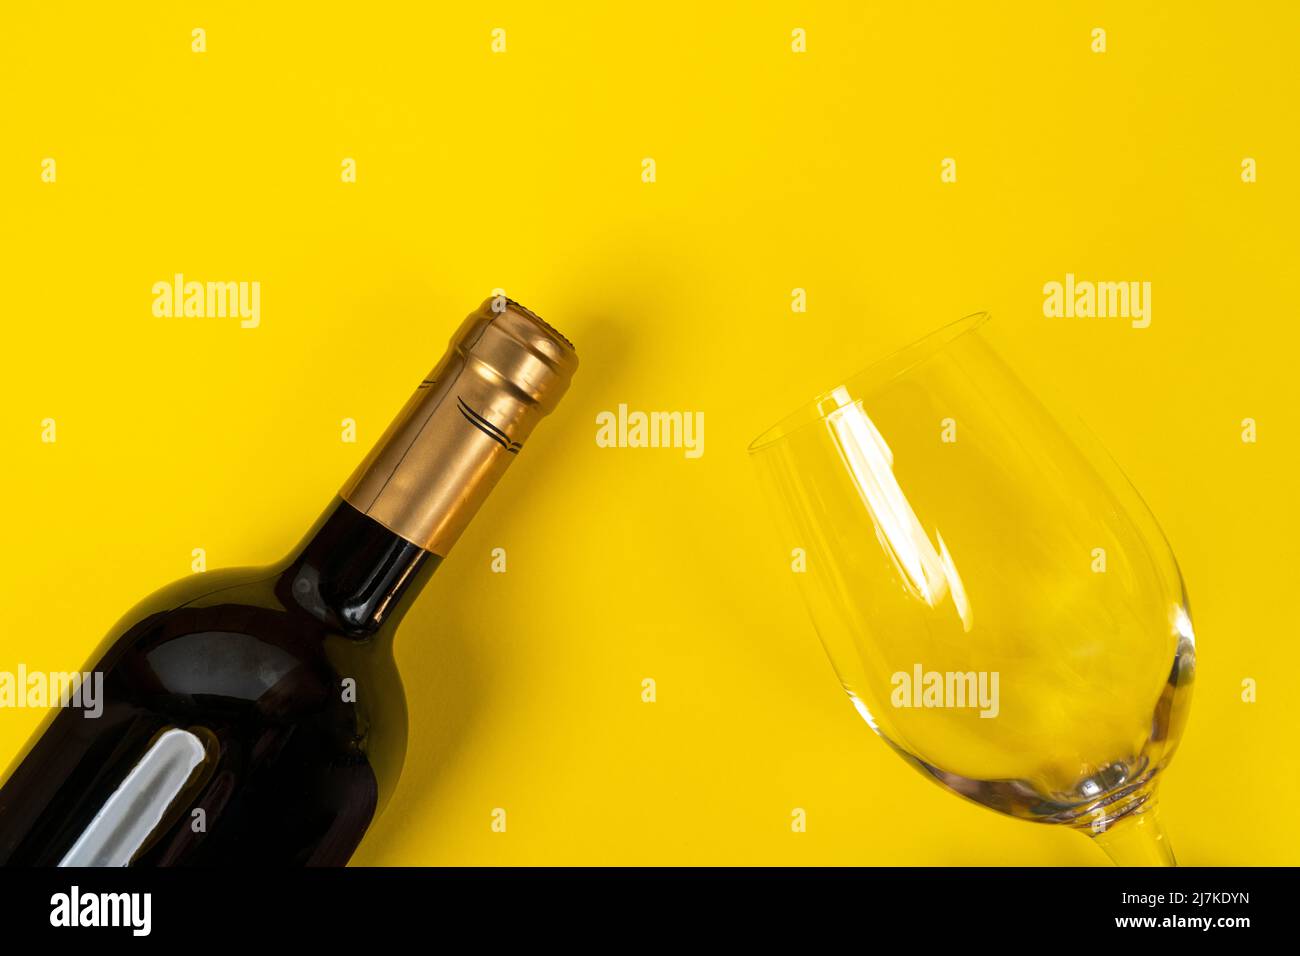 a bottle of red wine and a glass on a yellow surface Stock Photo